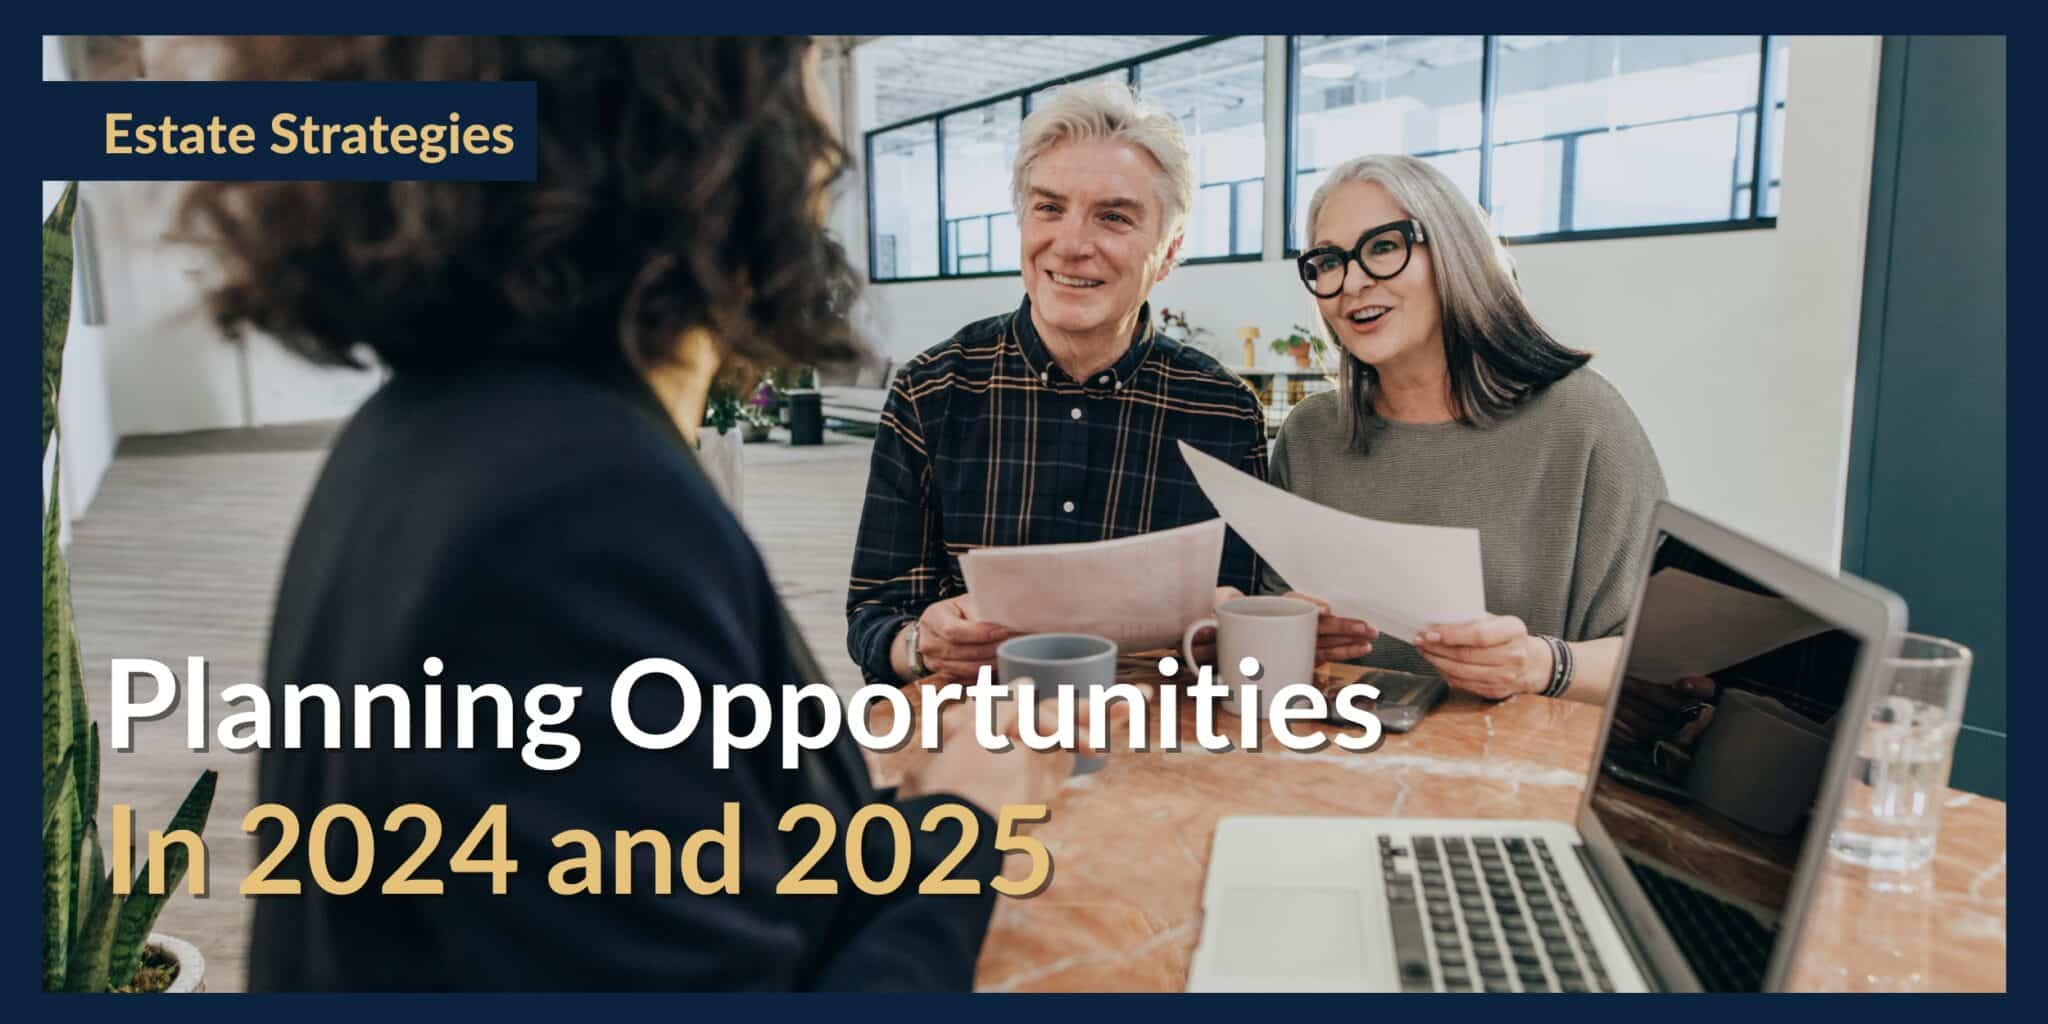 Estate Planning for 2024 and 2025 Seize Opportunities Before the Tax Sunset